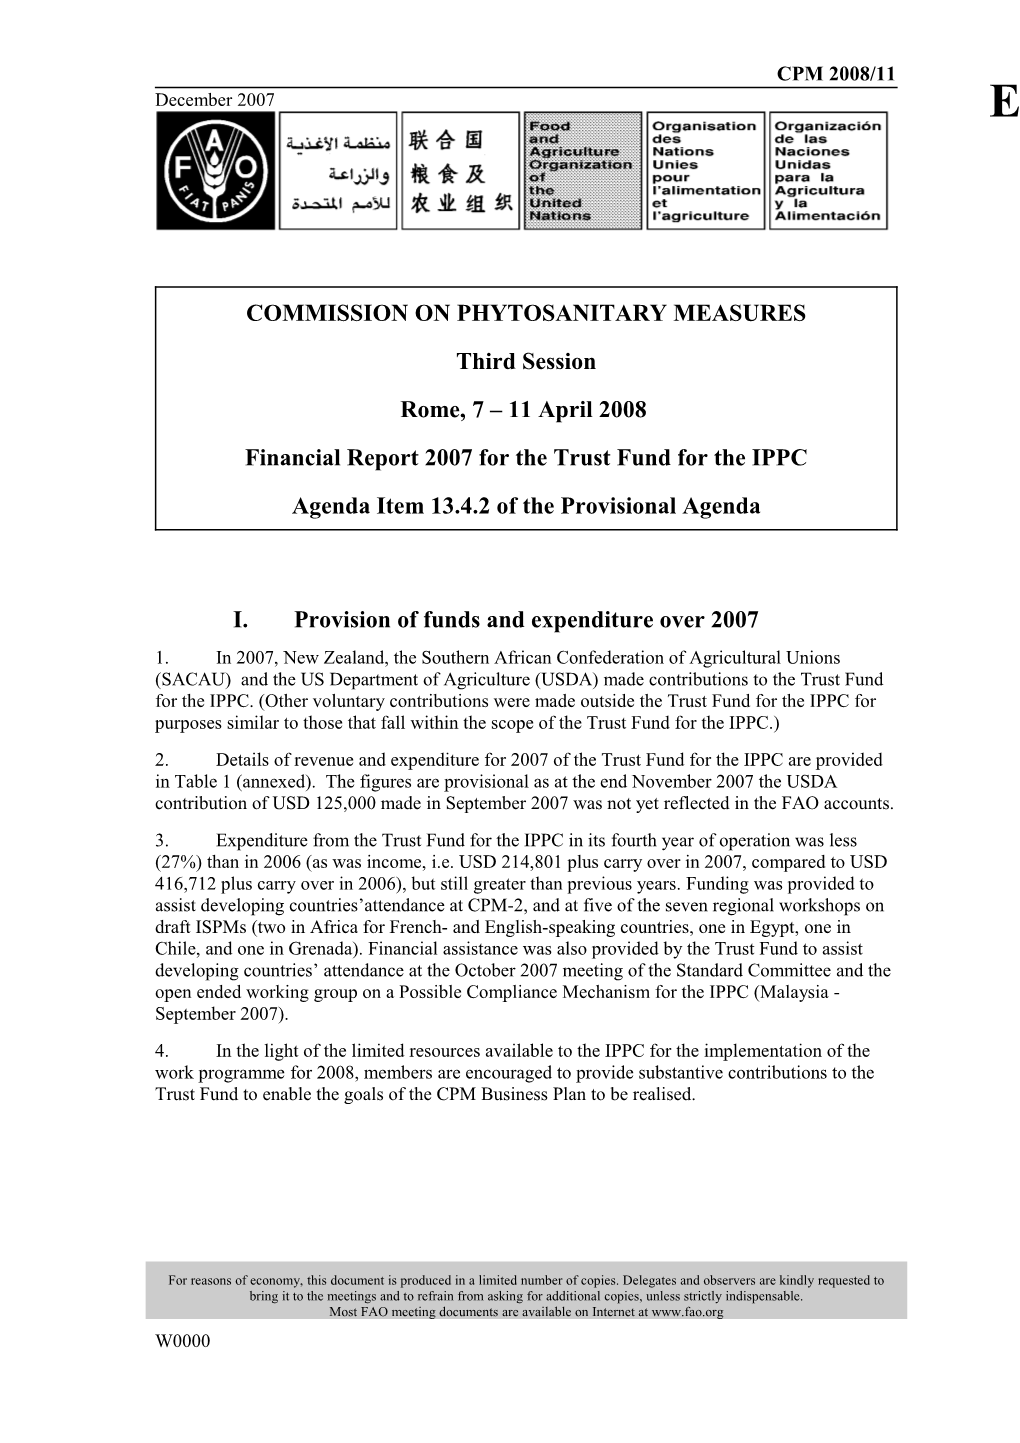 Financial Report 2007 for the Trust Fund for the IPPC